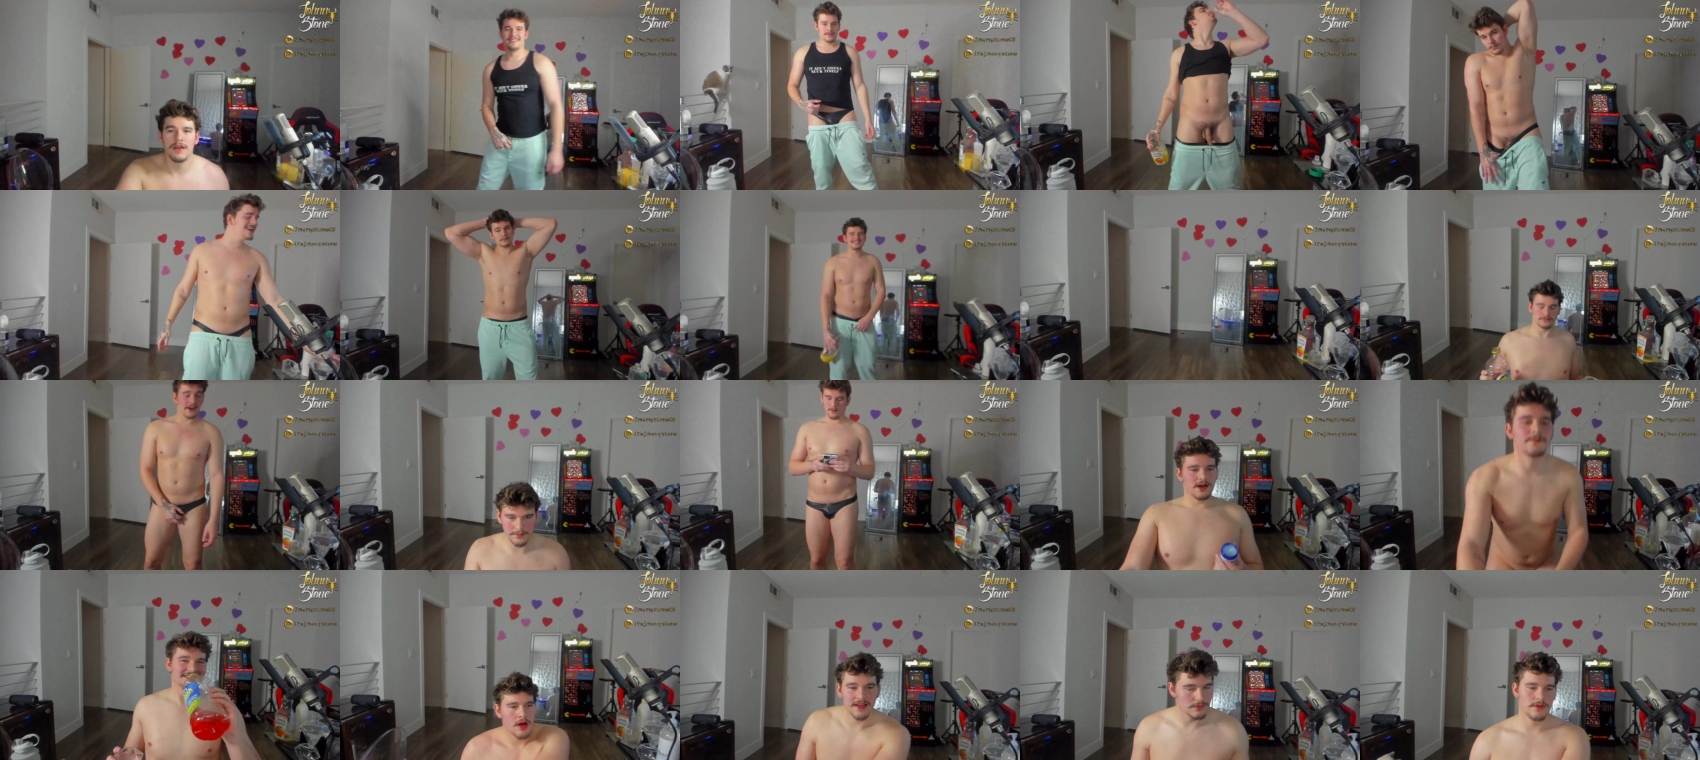 thejohnnystone  24-02-2022 Males Topless